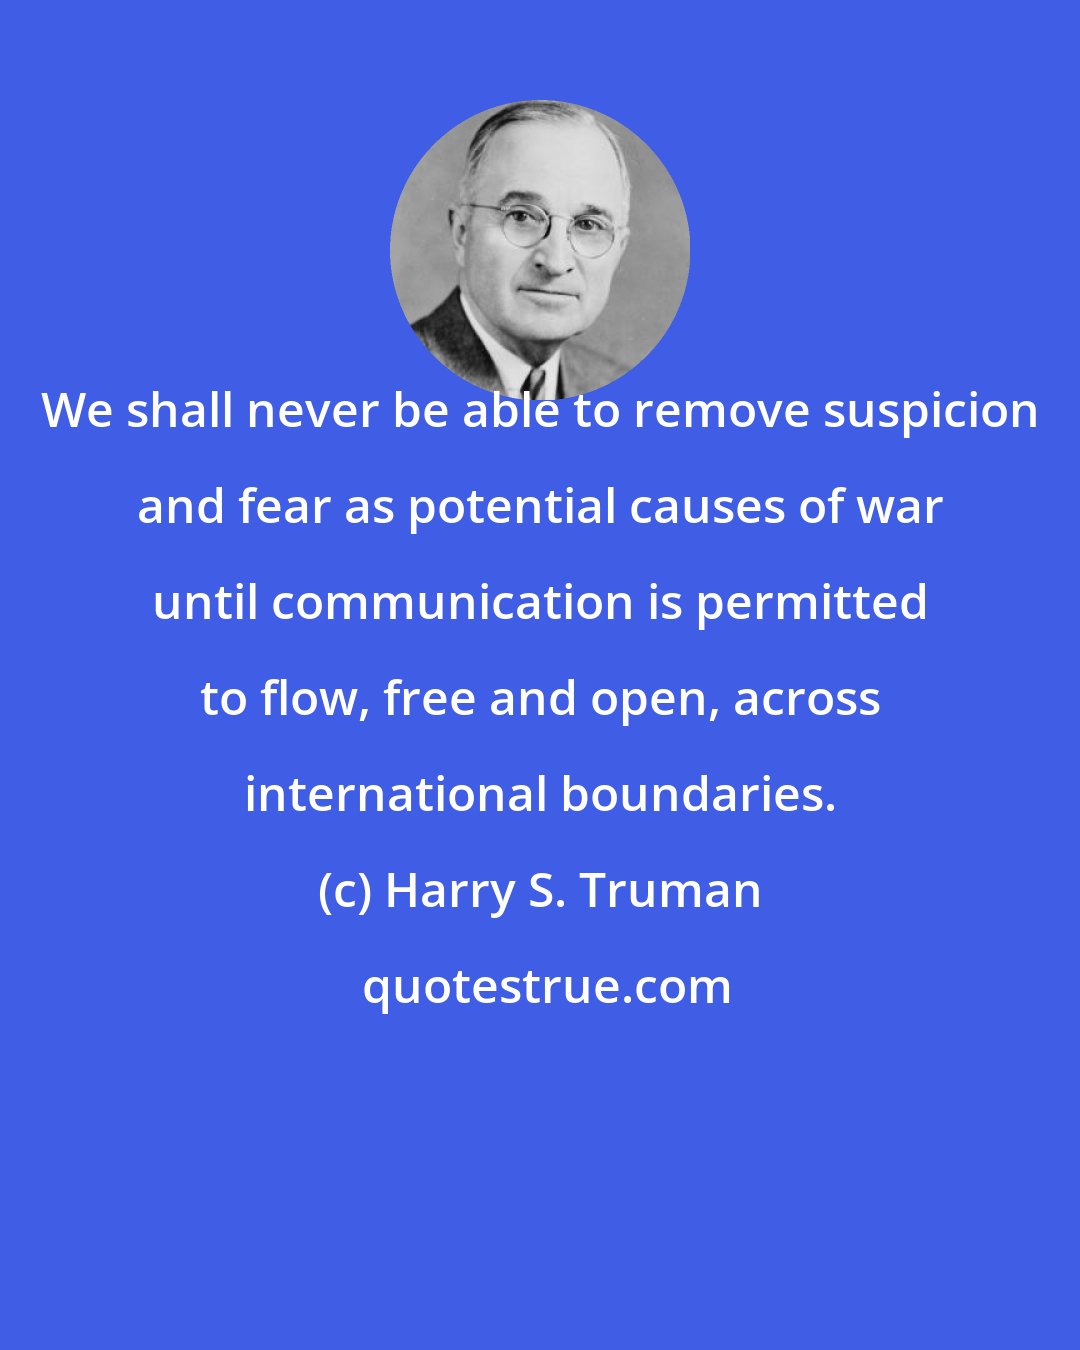 Harry S. Truman: We shall never be able to remove suspicion and fear as potential causes of war until communication is permitted to flow, free and open, across international boundaries.